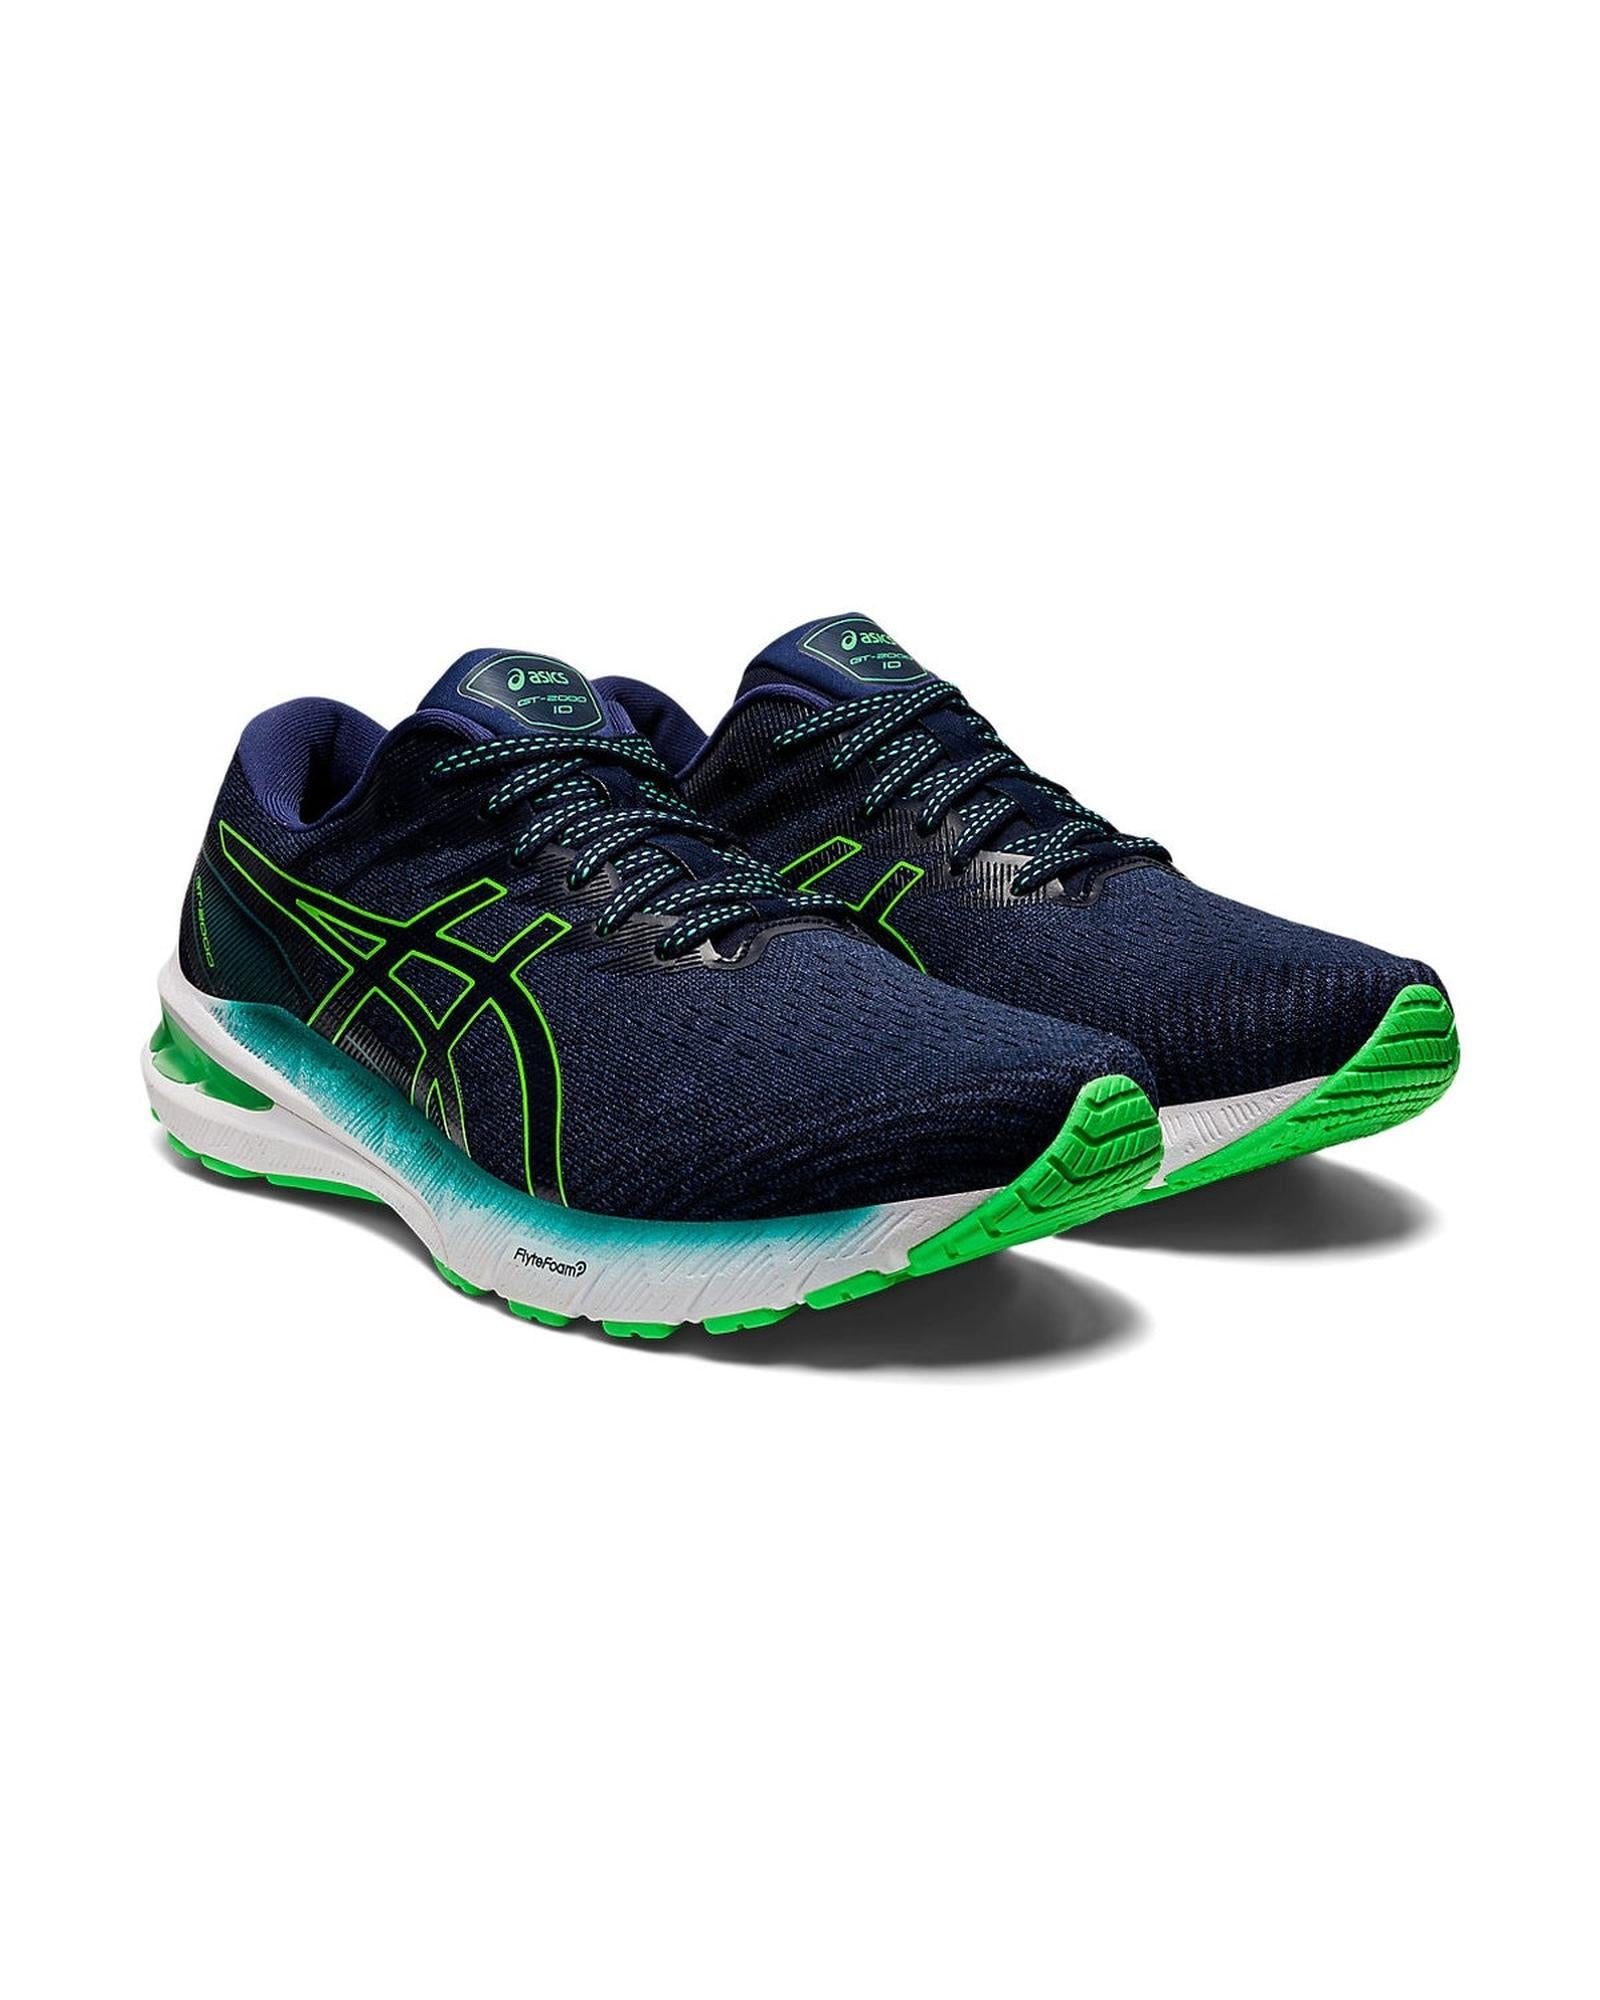 Versatile Mens Running Shoes with Advanced Cushioning Technology - 13 US